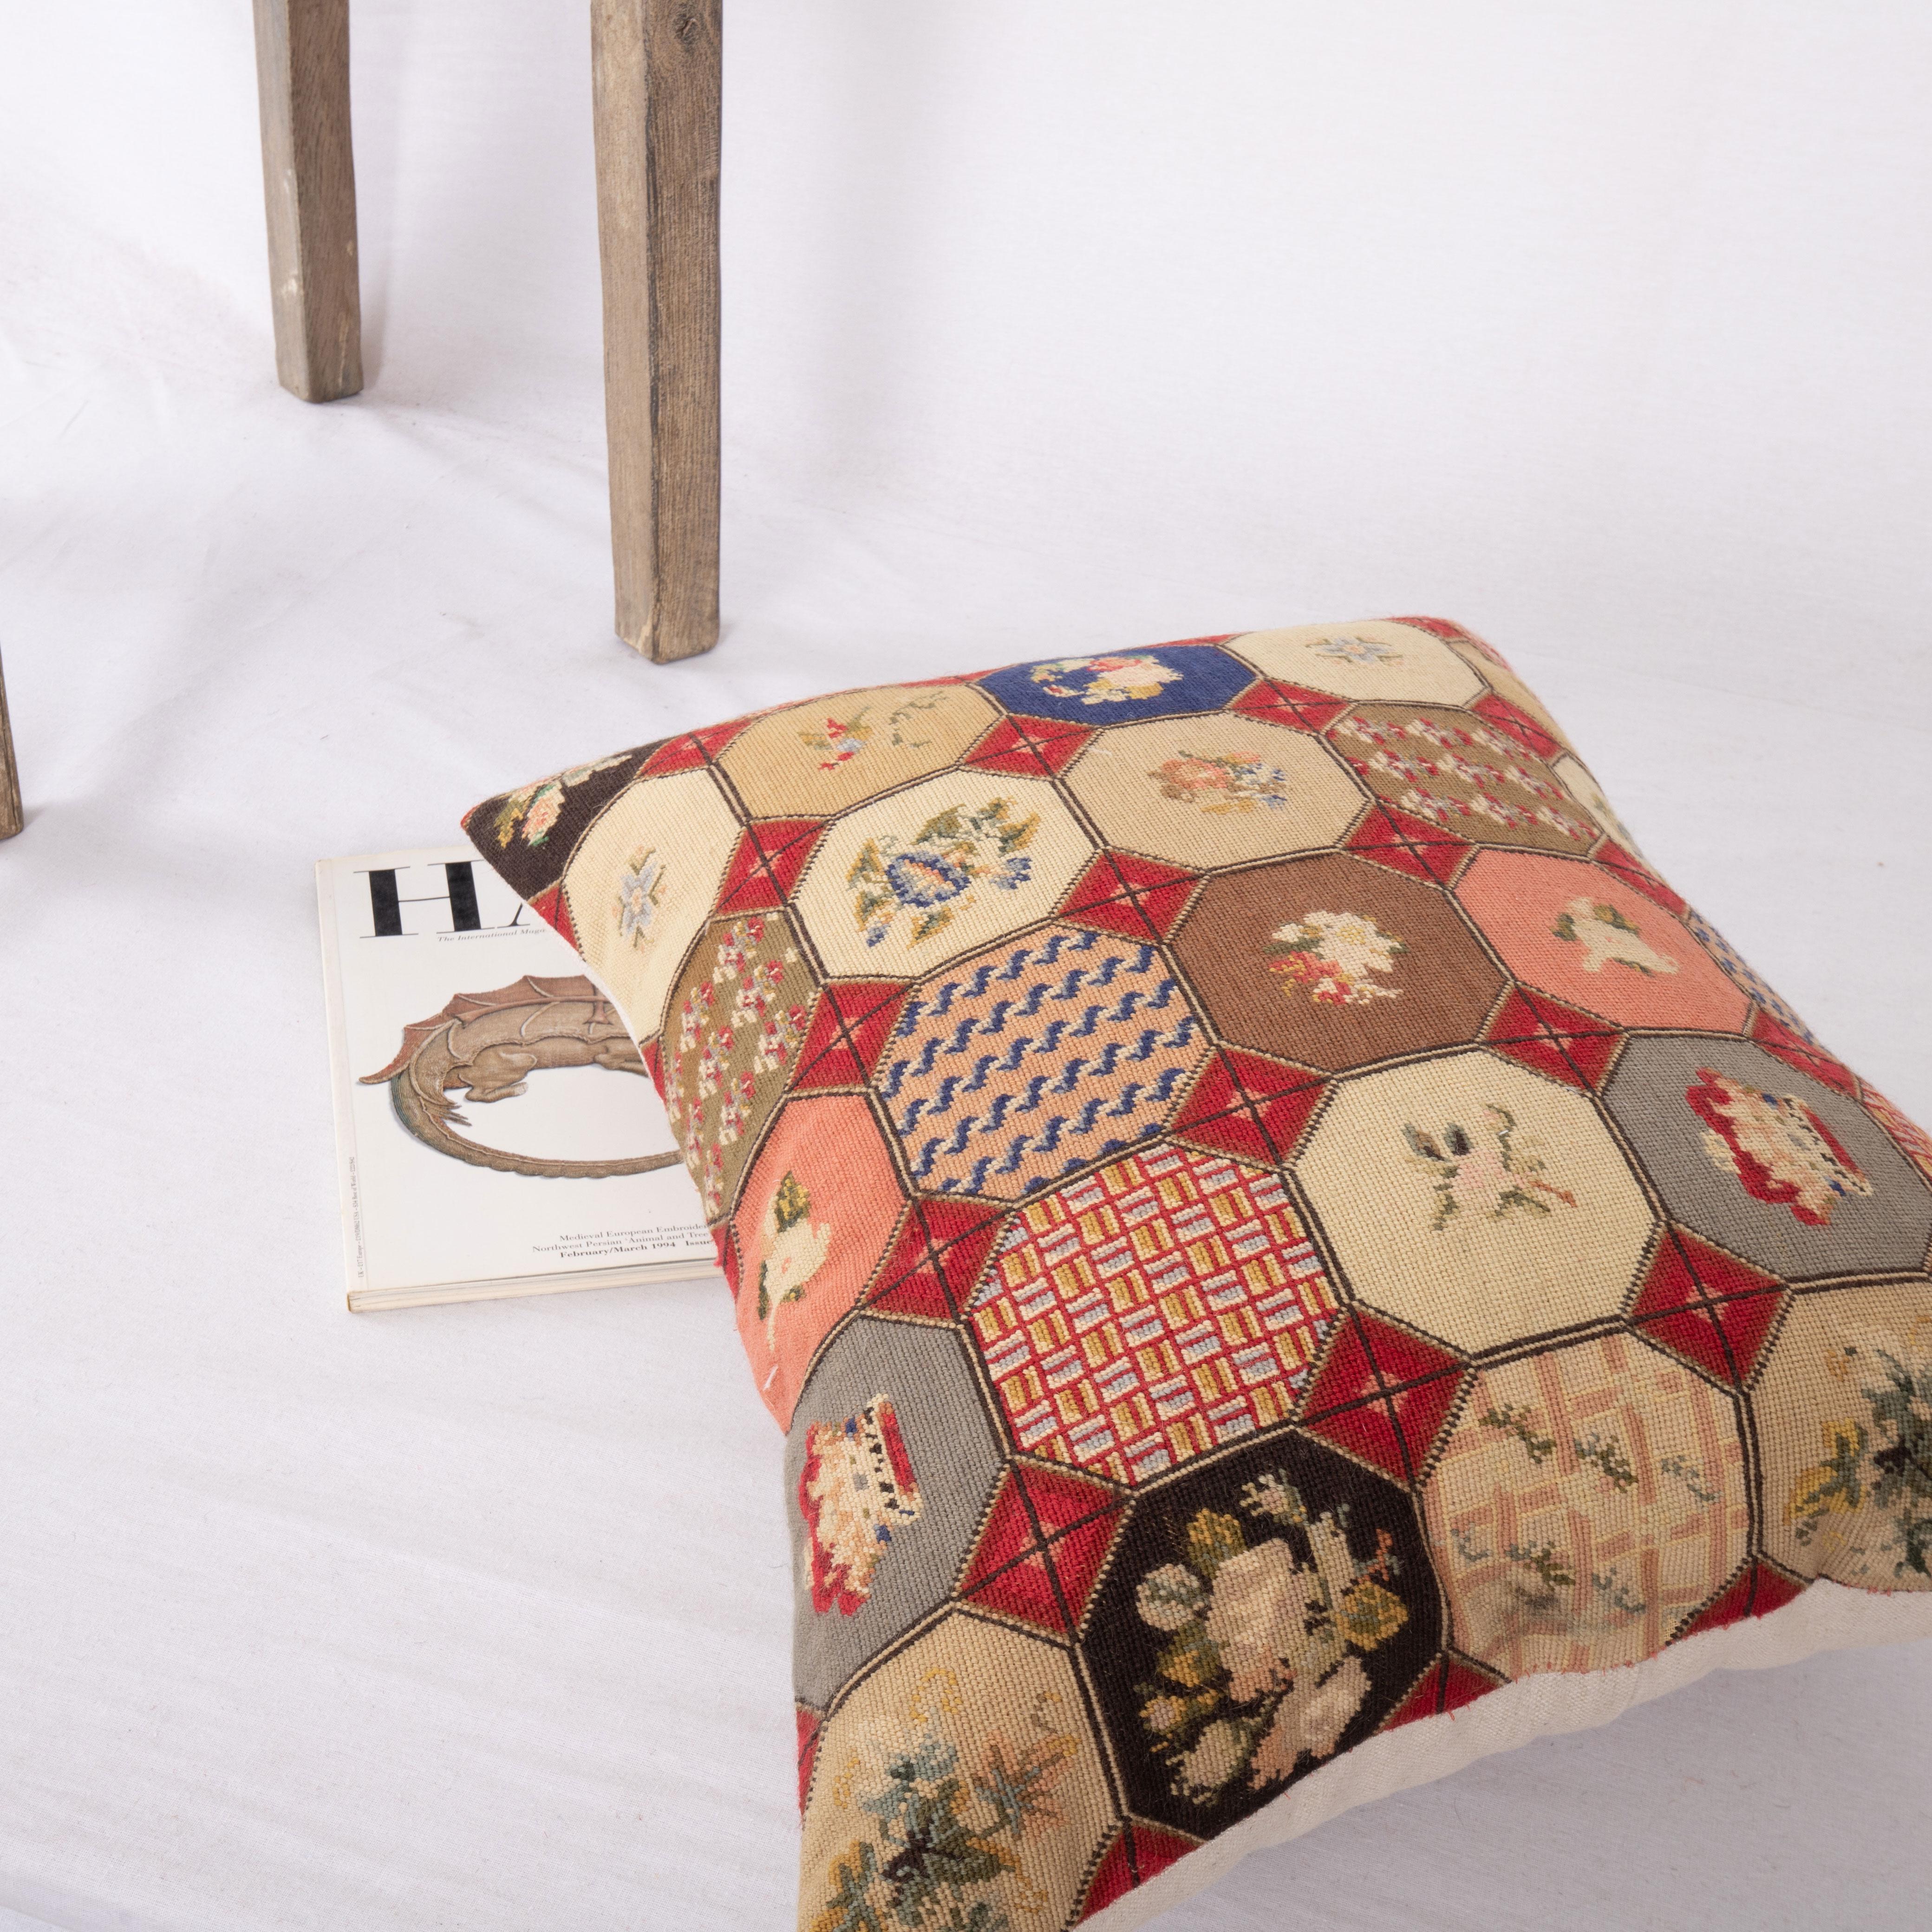 20th Century Pillow Cover Made from an Antique Petit Point European Embroidery Early 20th C